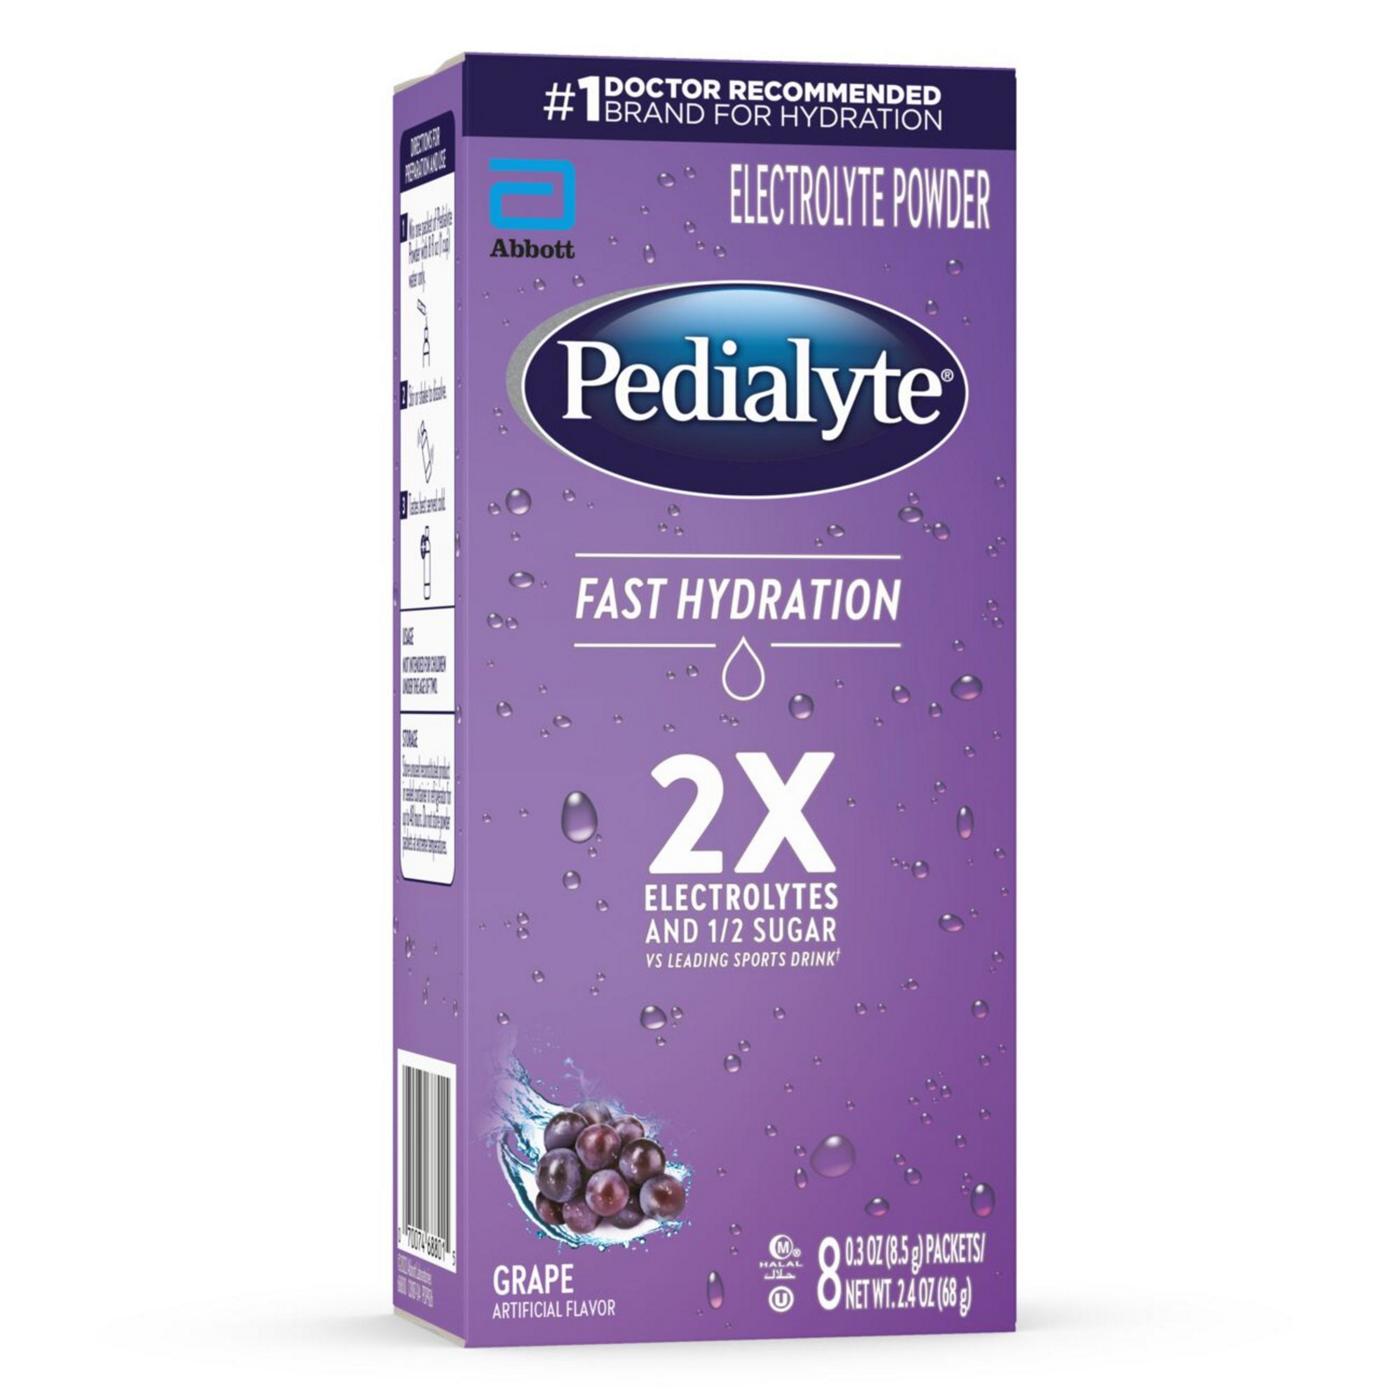 Pedialyte Fast Hydration Electrolyte Packets - Grape; image 5 of 8